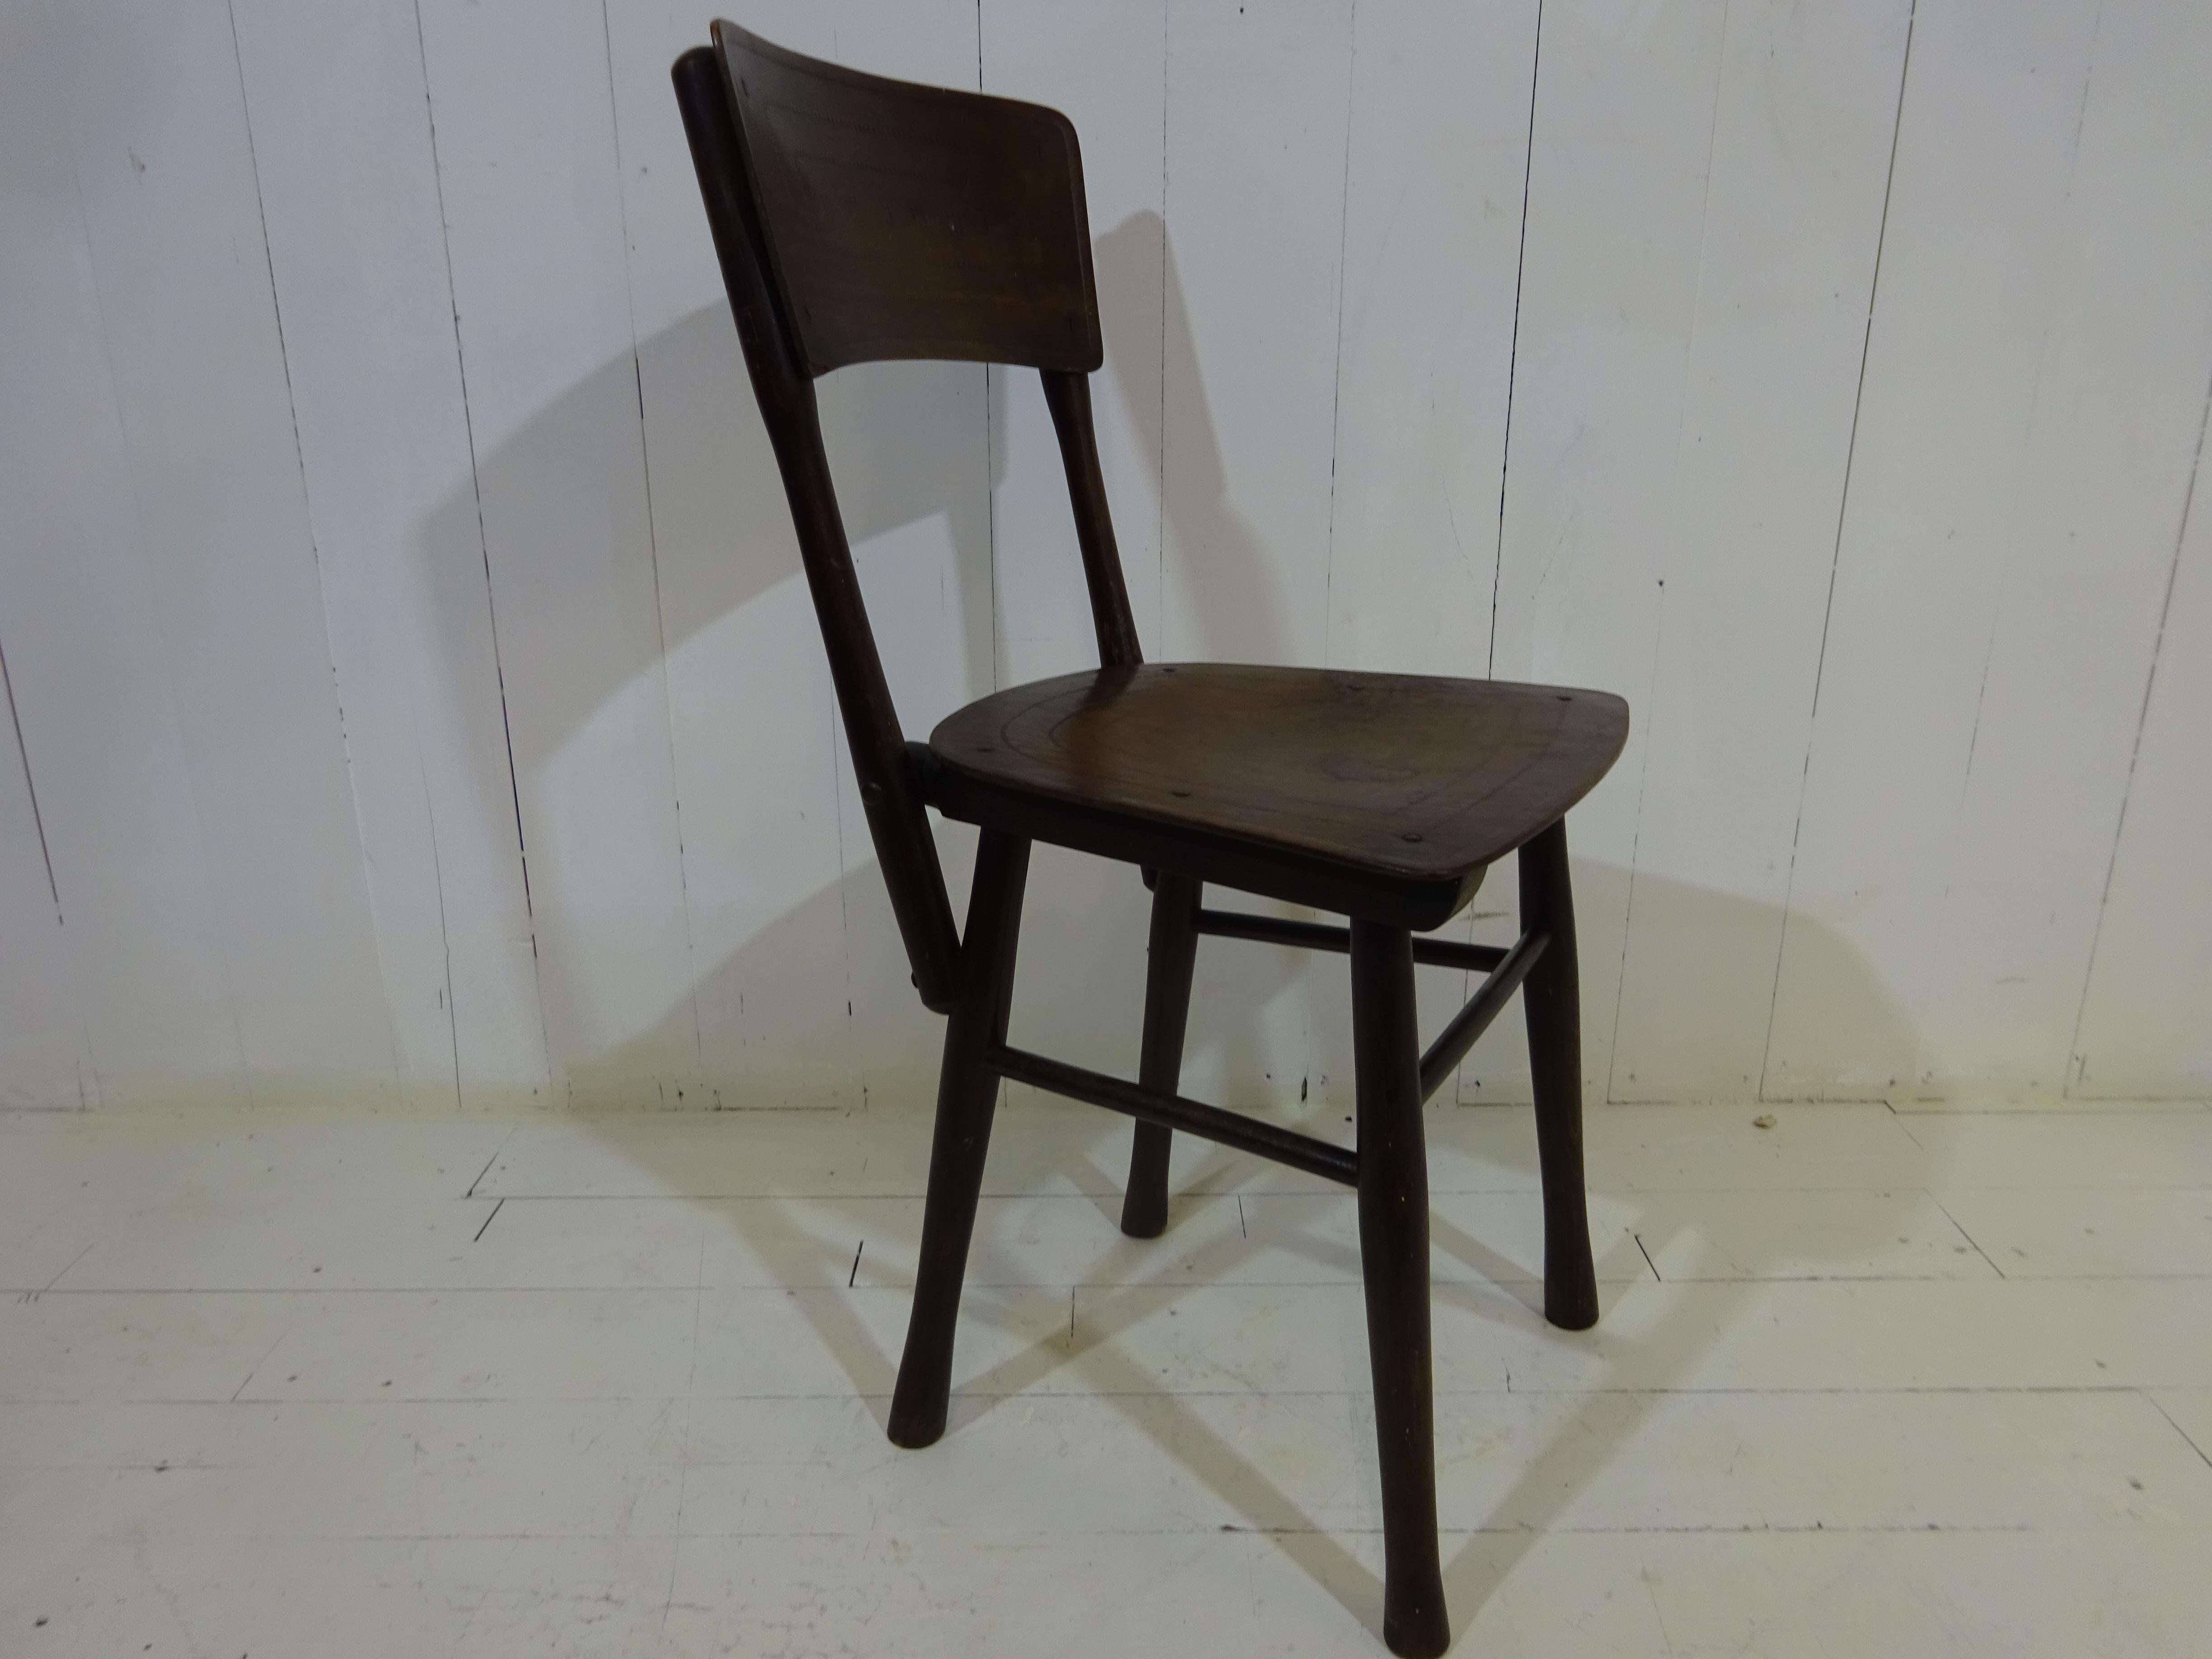 Original Antique Cafe Chair by J&J Kohn Ltd In Good Condition For Sale In Tarleton, GB